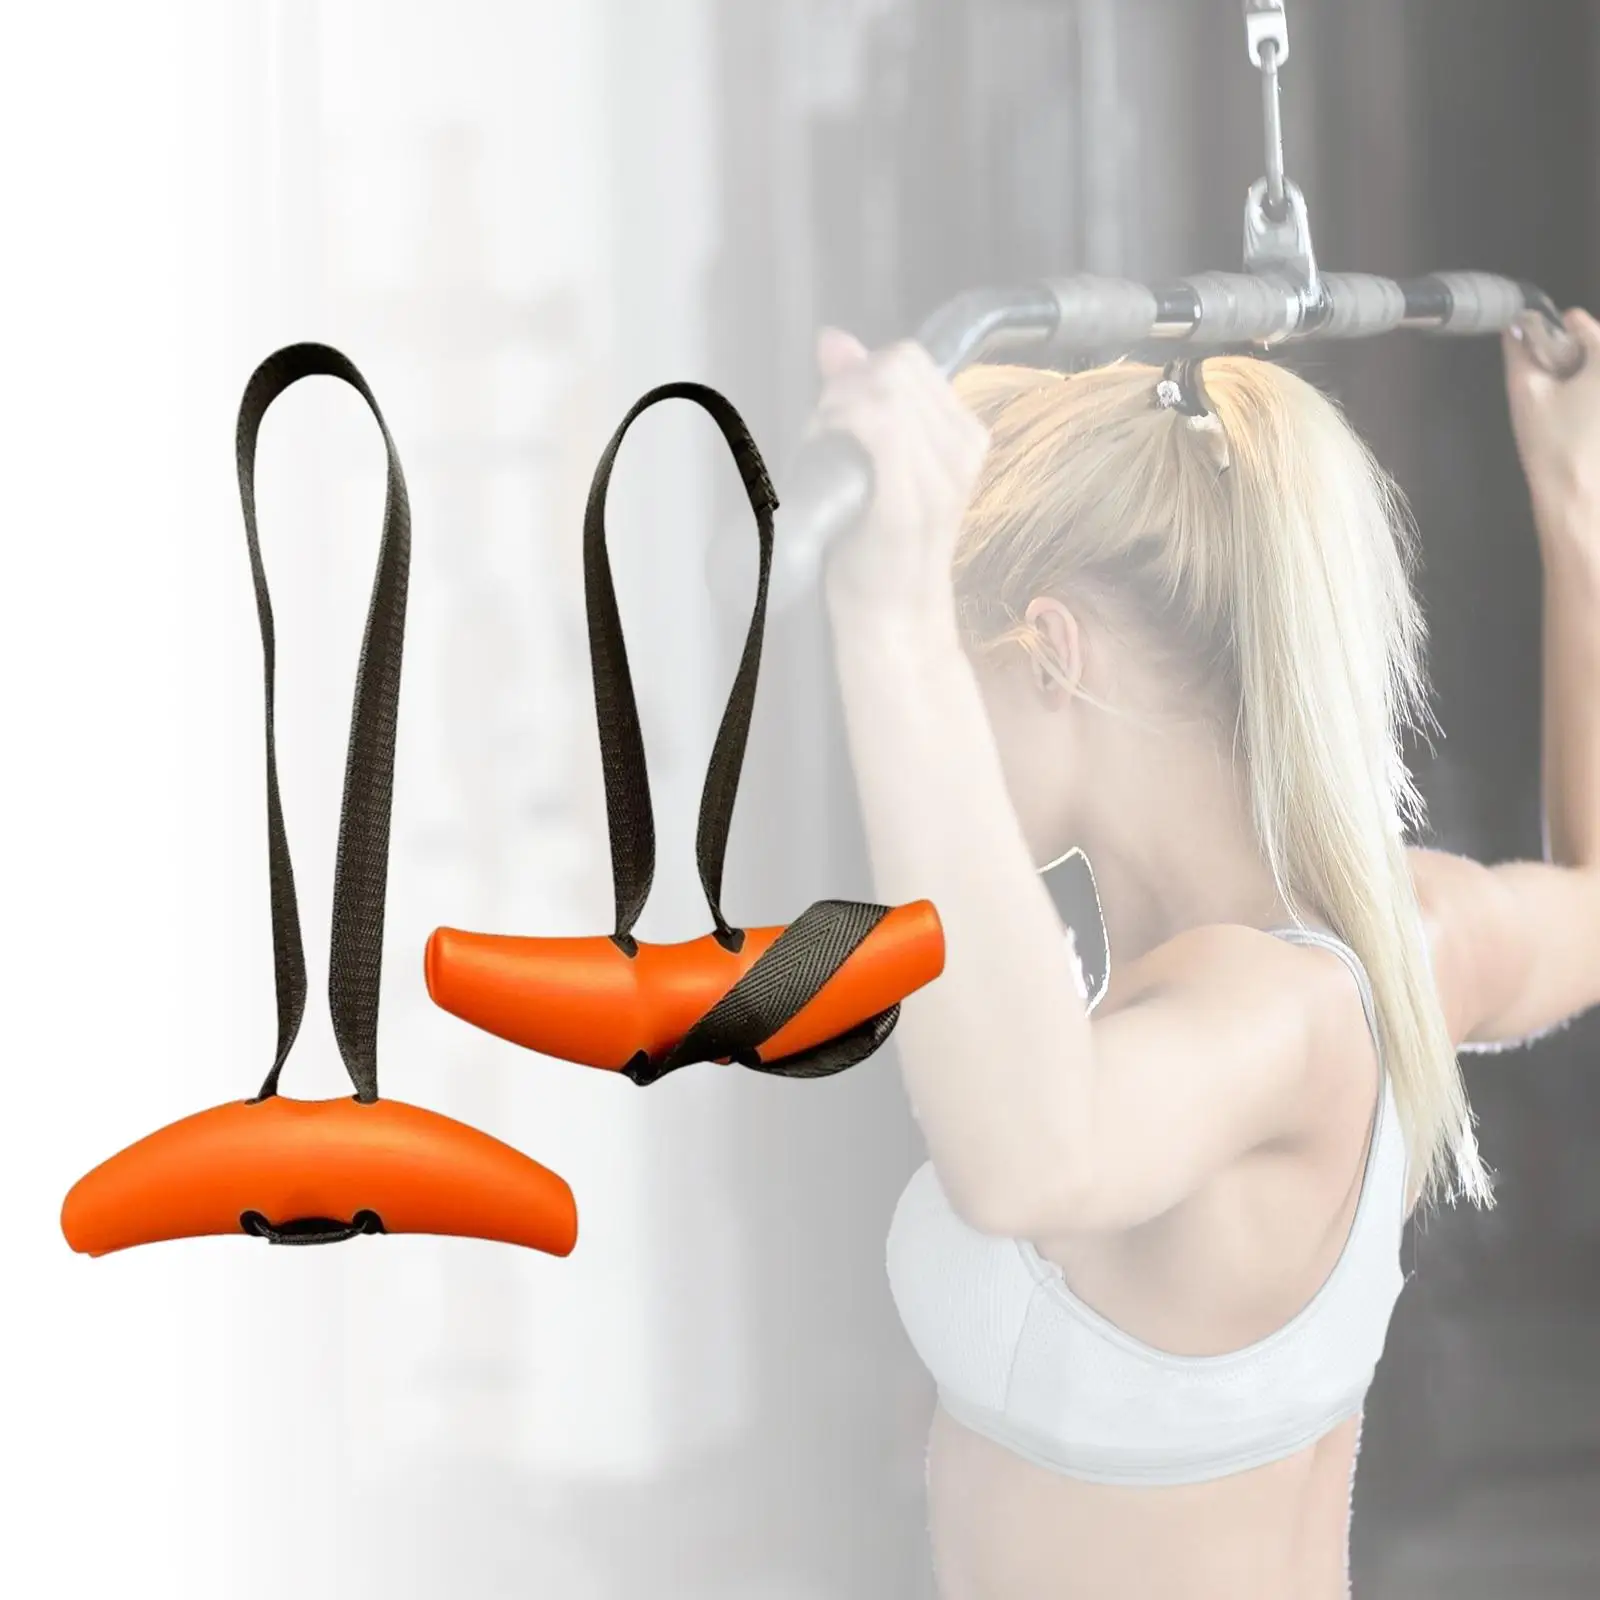 2x Pull up Handles Training Grips Workout Handles Heavy Duty Strong Nylon for Barbell Dumbbell Row Attachment Fitness Home